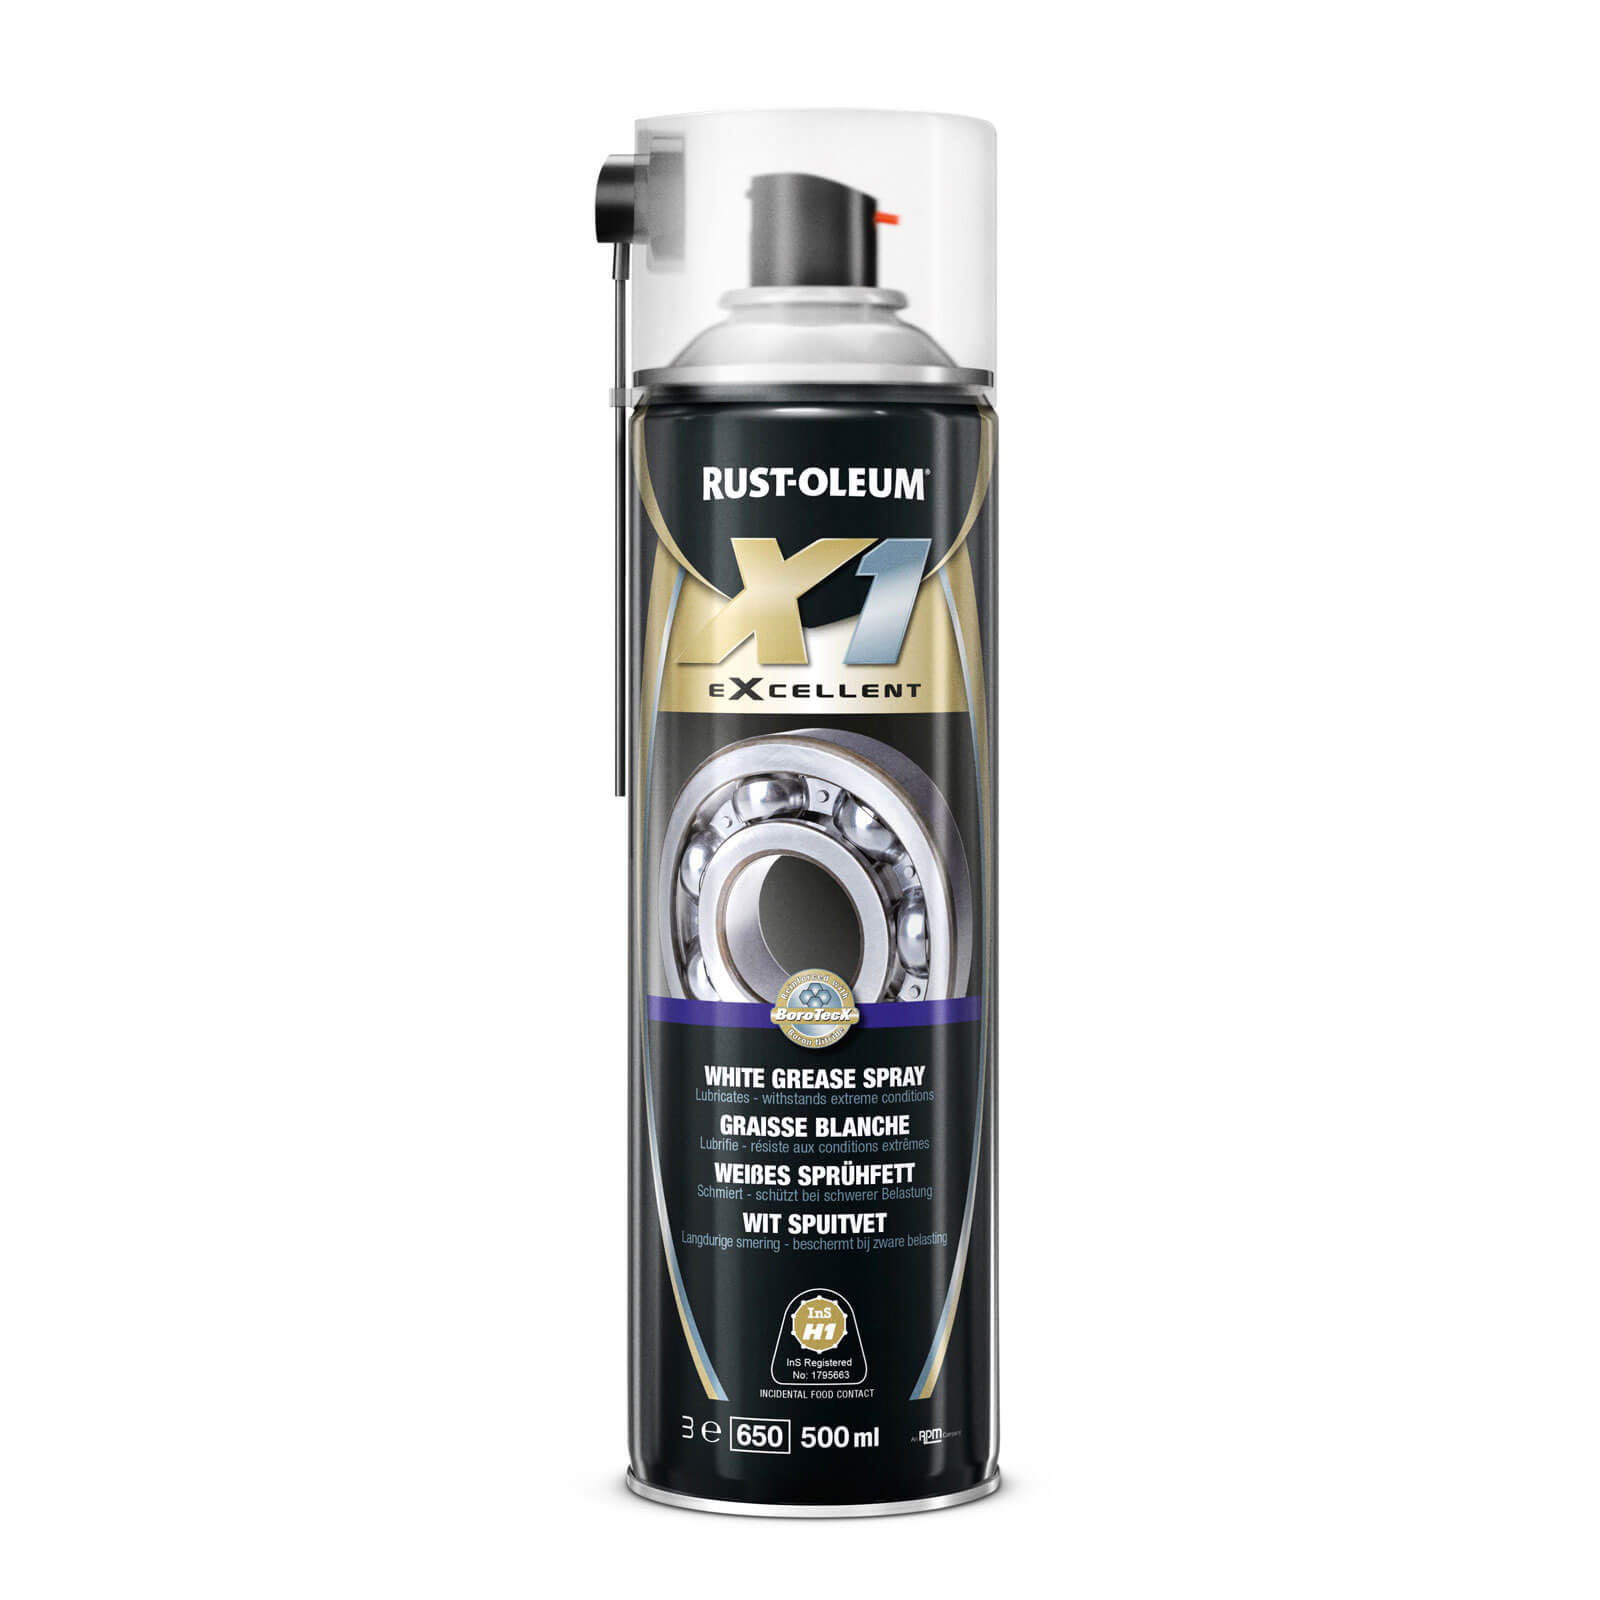 Image of Rust Oleum X1 eXcellent White Grease Lubricating Spray 500ml